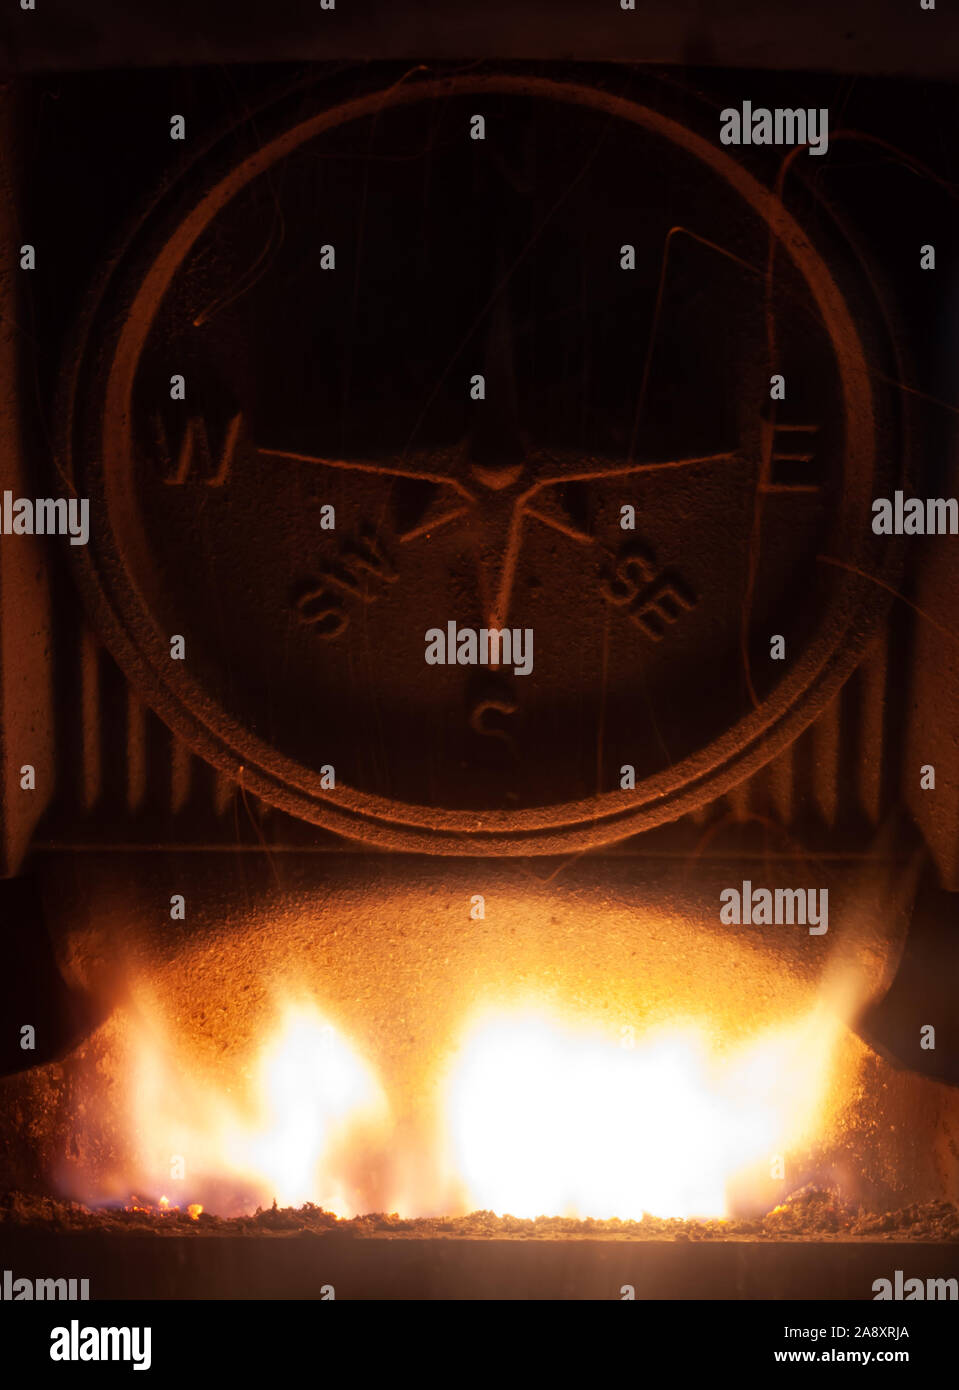 A Compass in a Fire Place with a Roaring Fire Stock Photo